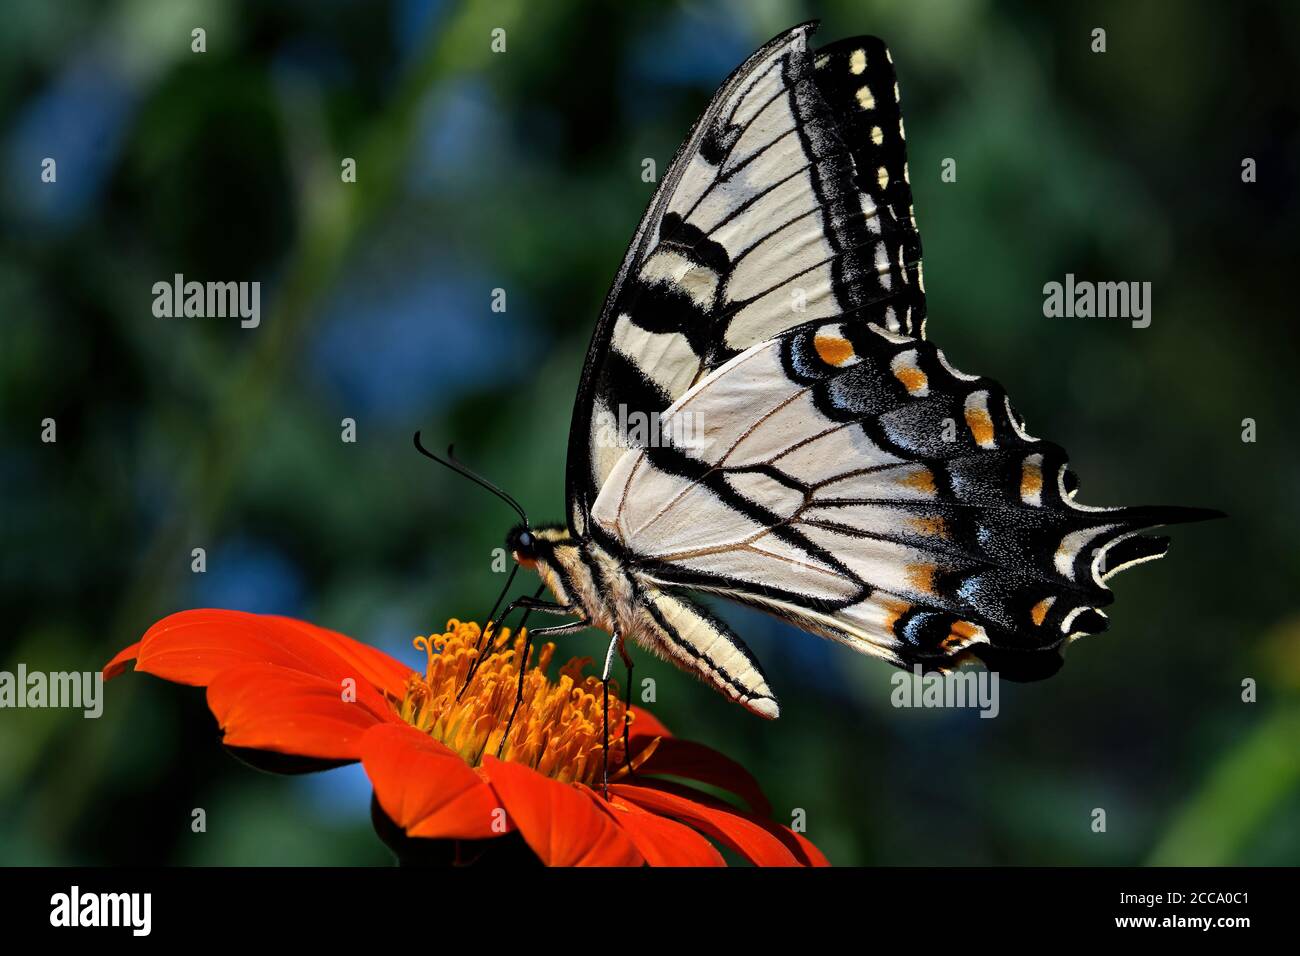 Eastern tiger swallowtail on Echinacea flower. The butterfly is a swallowtail butterfly native to eastern North America. Stock Photo